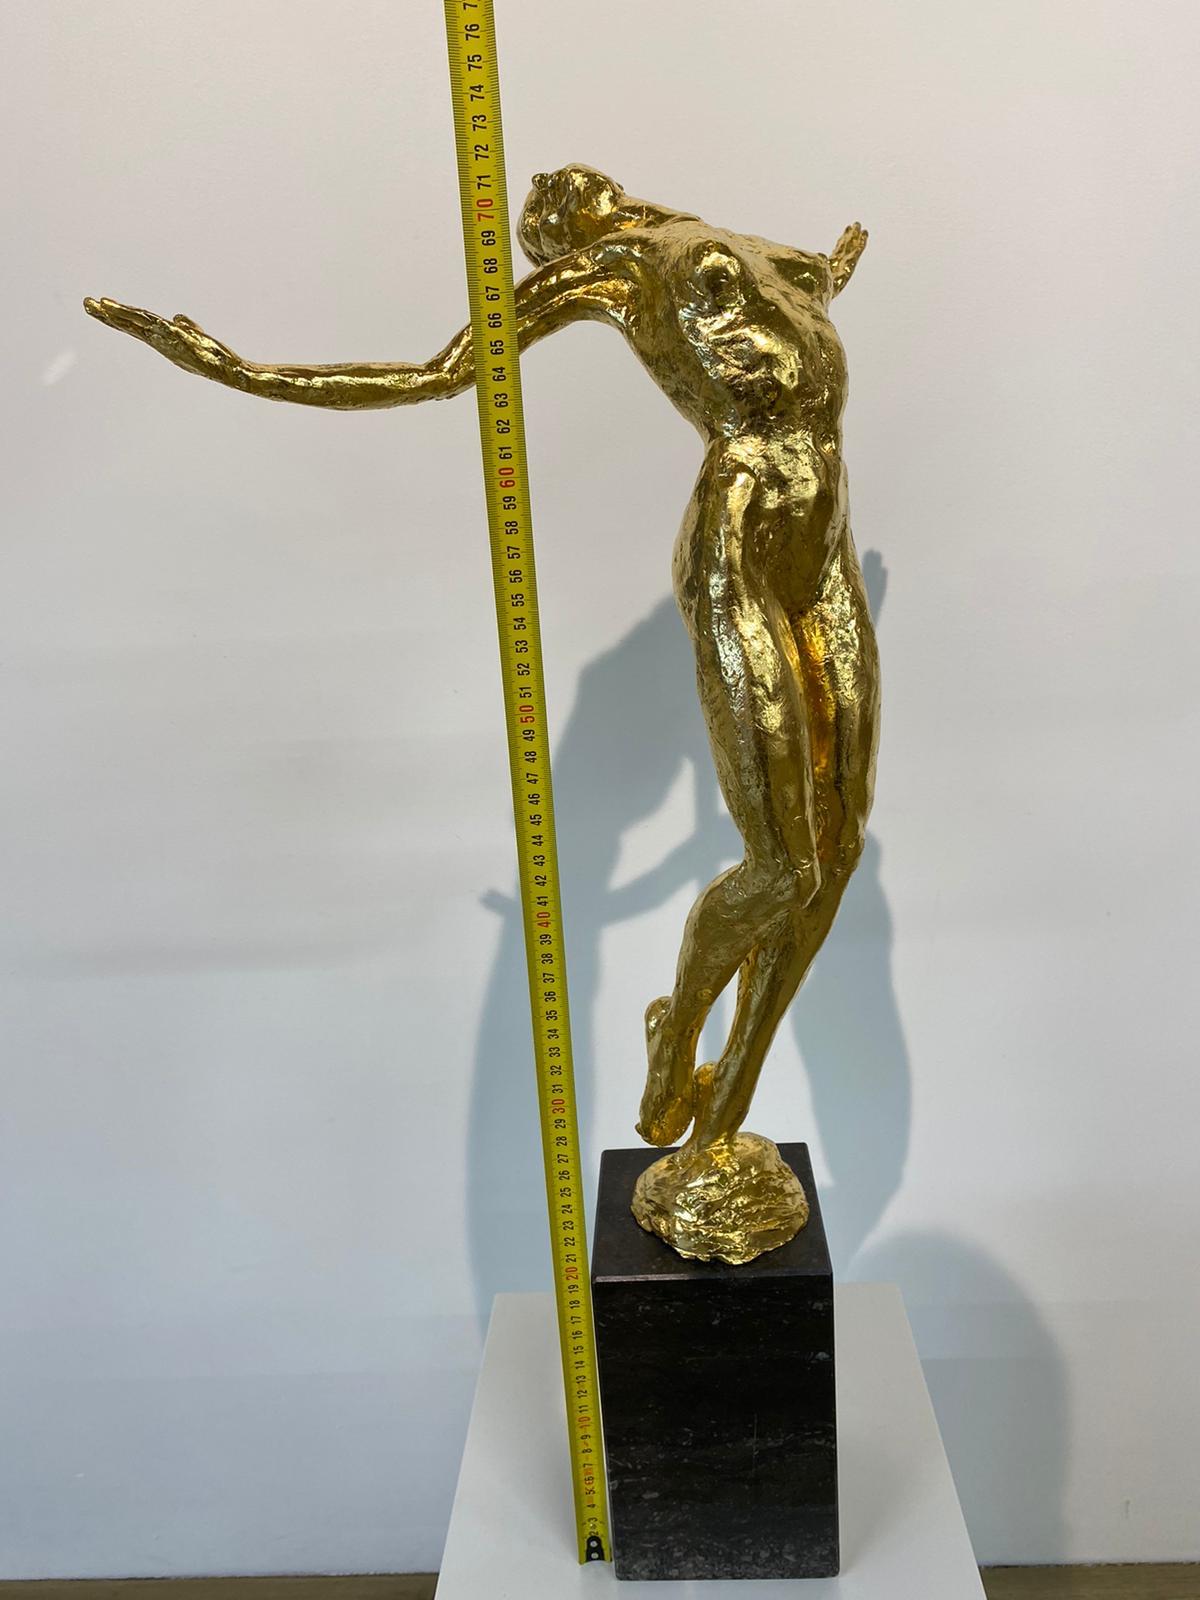 Living Daylight Gold- 21st Century Sculpture of a nude woman  2